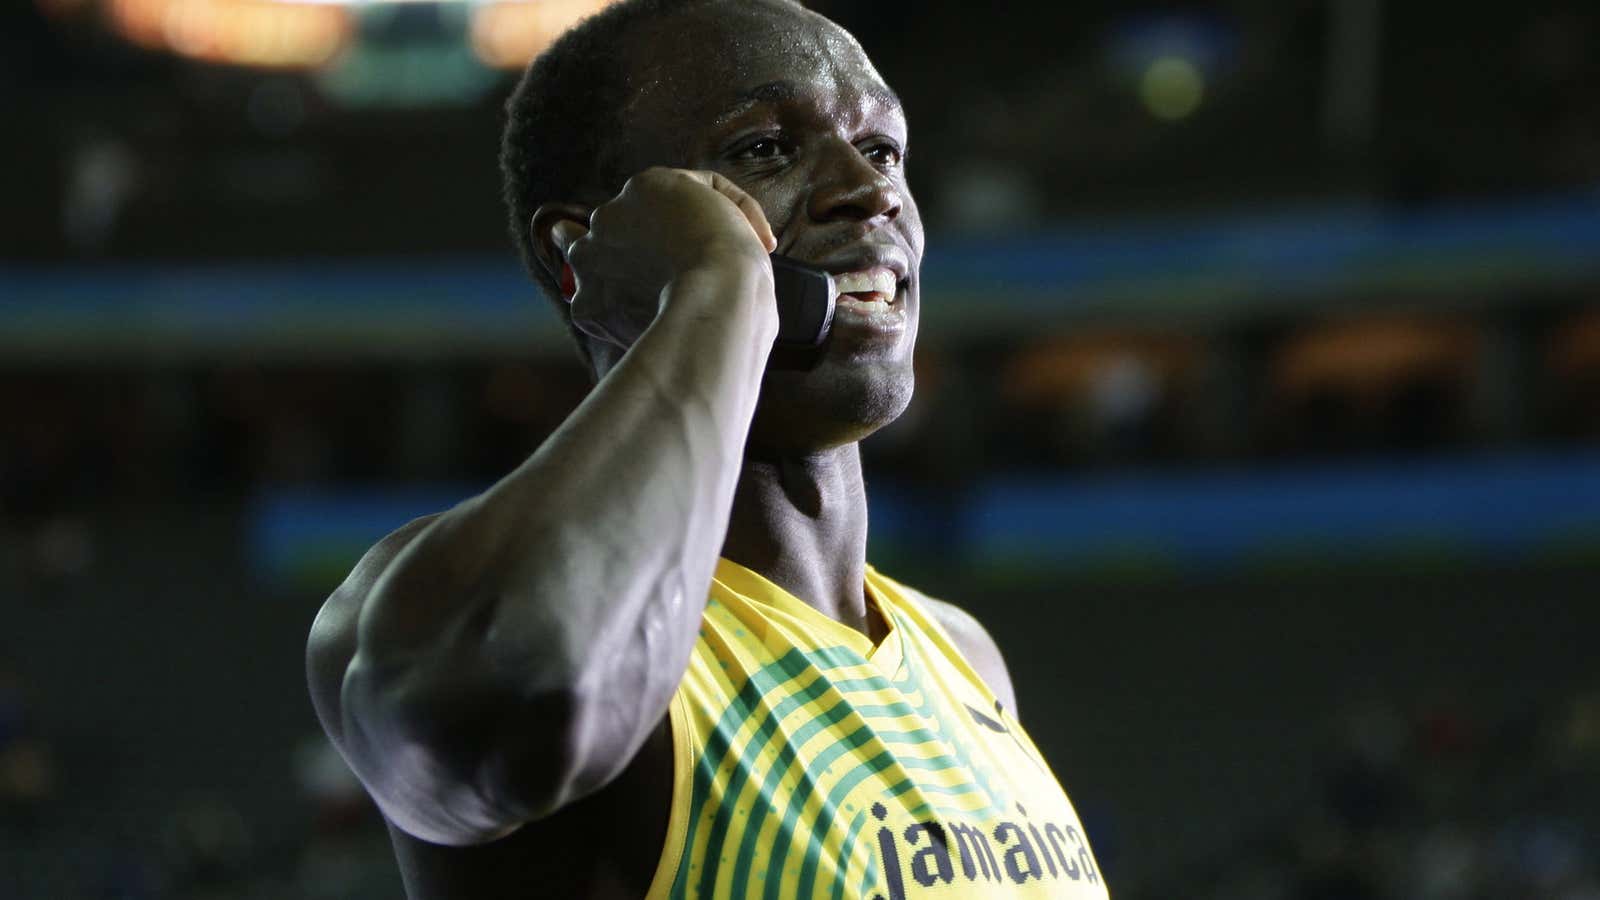 The world’s fastest man uses the world’s most far-flung network.